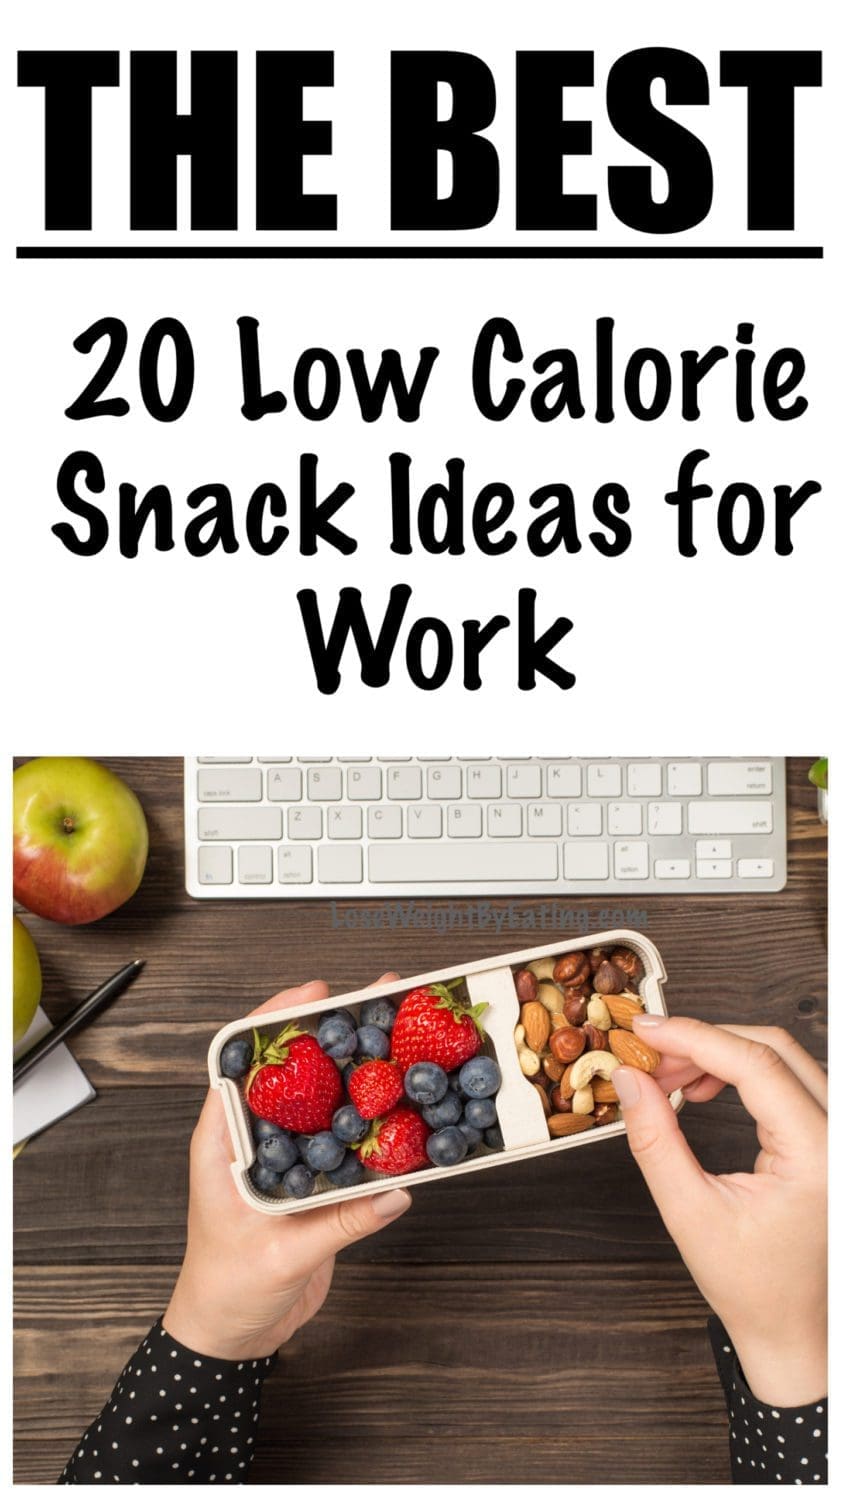 20 Low Calorie Snack Ideas for Work